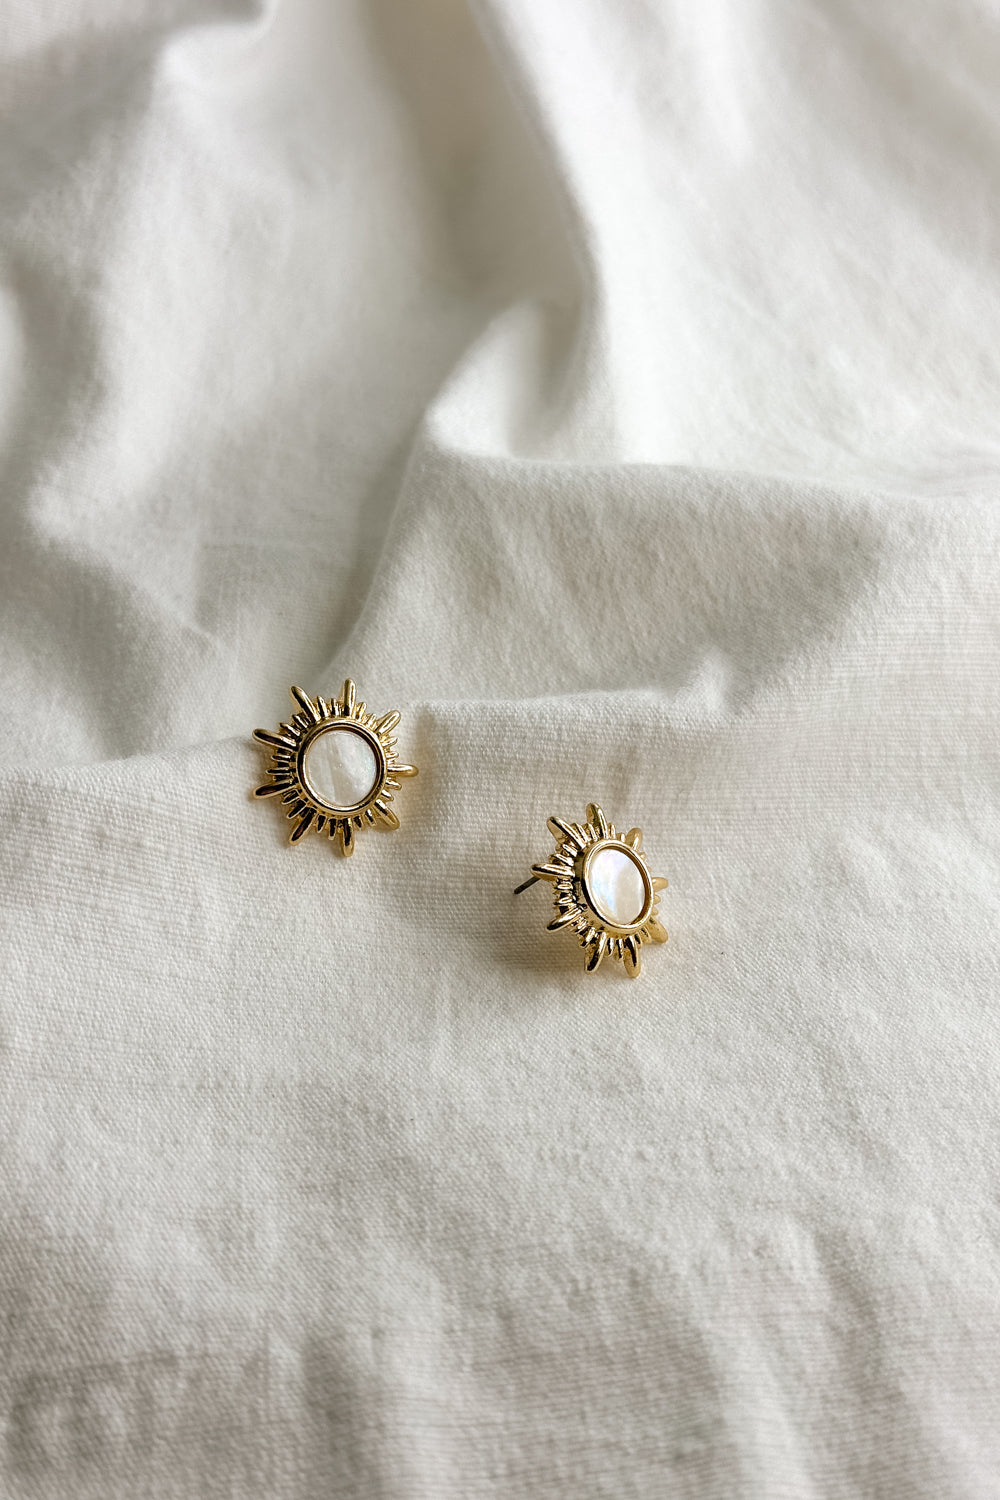 Flat lay view of Faith Gold & White Starburst Stud Earring which features old starburst studs with white stone